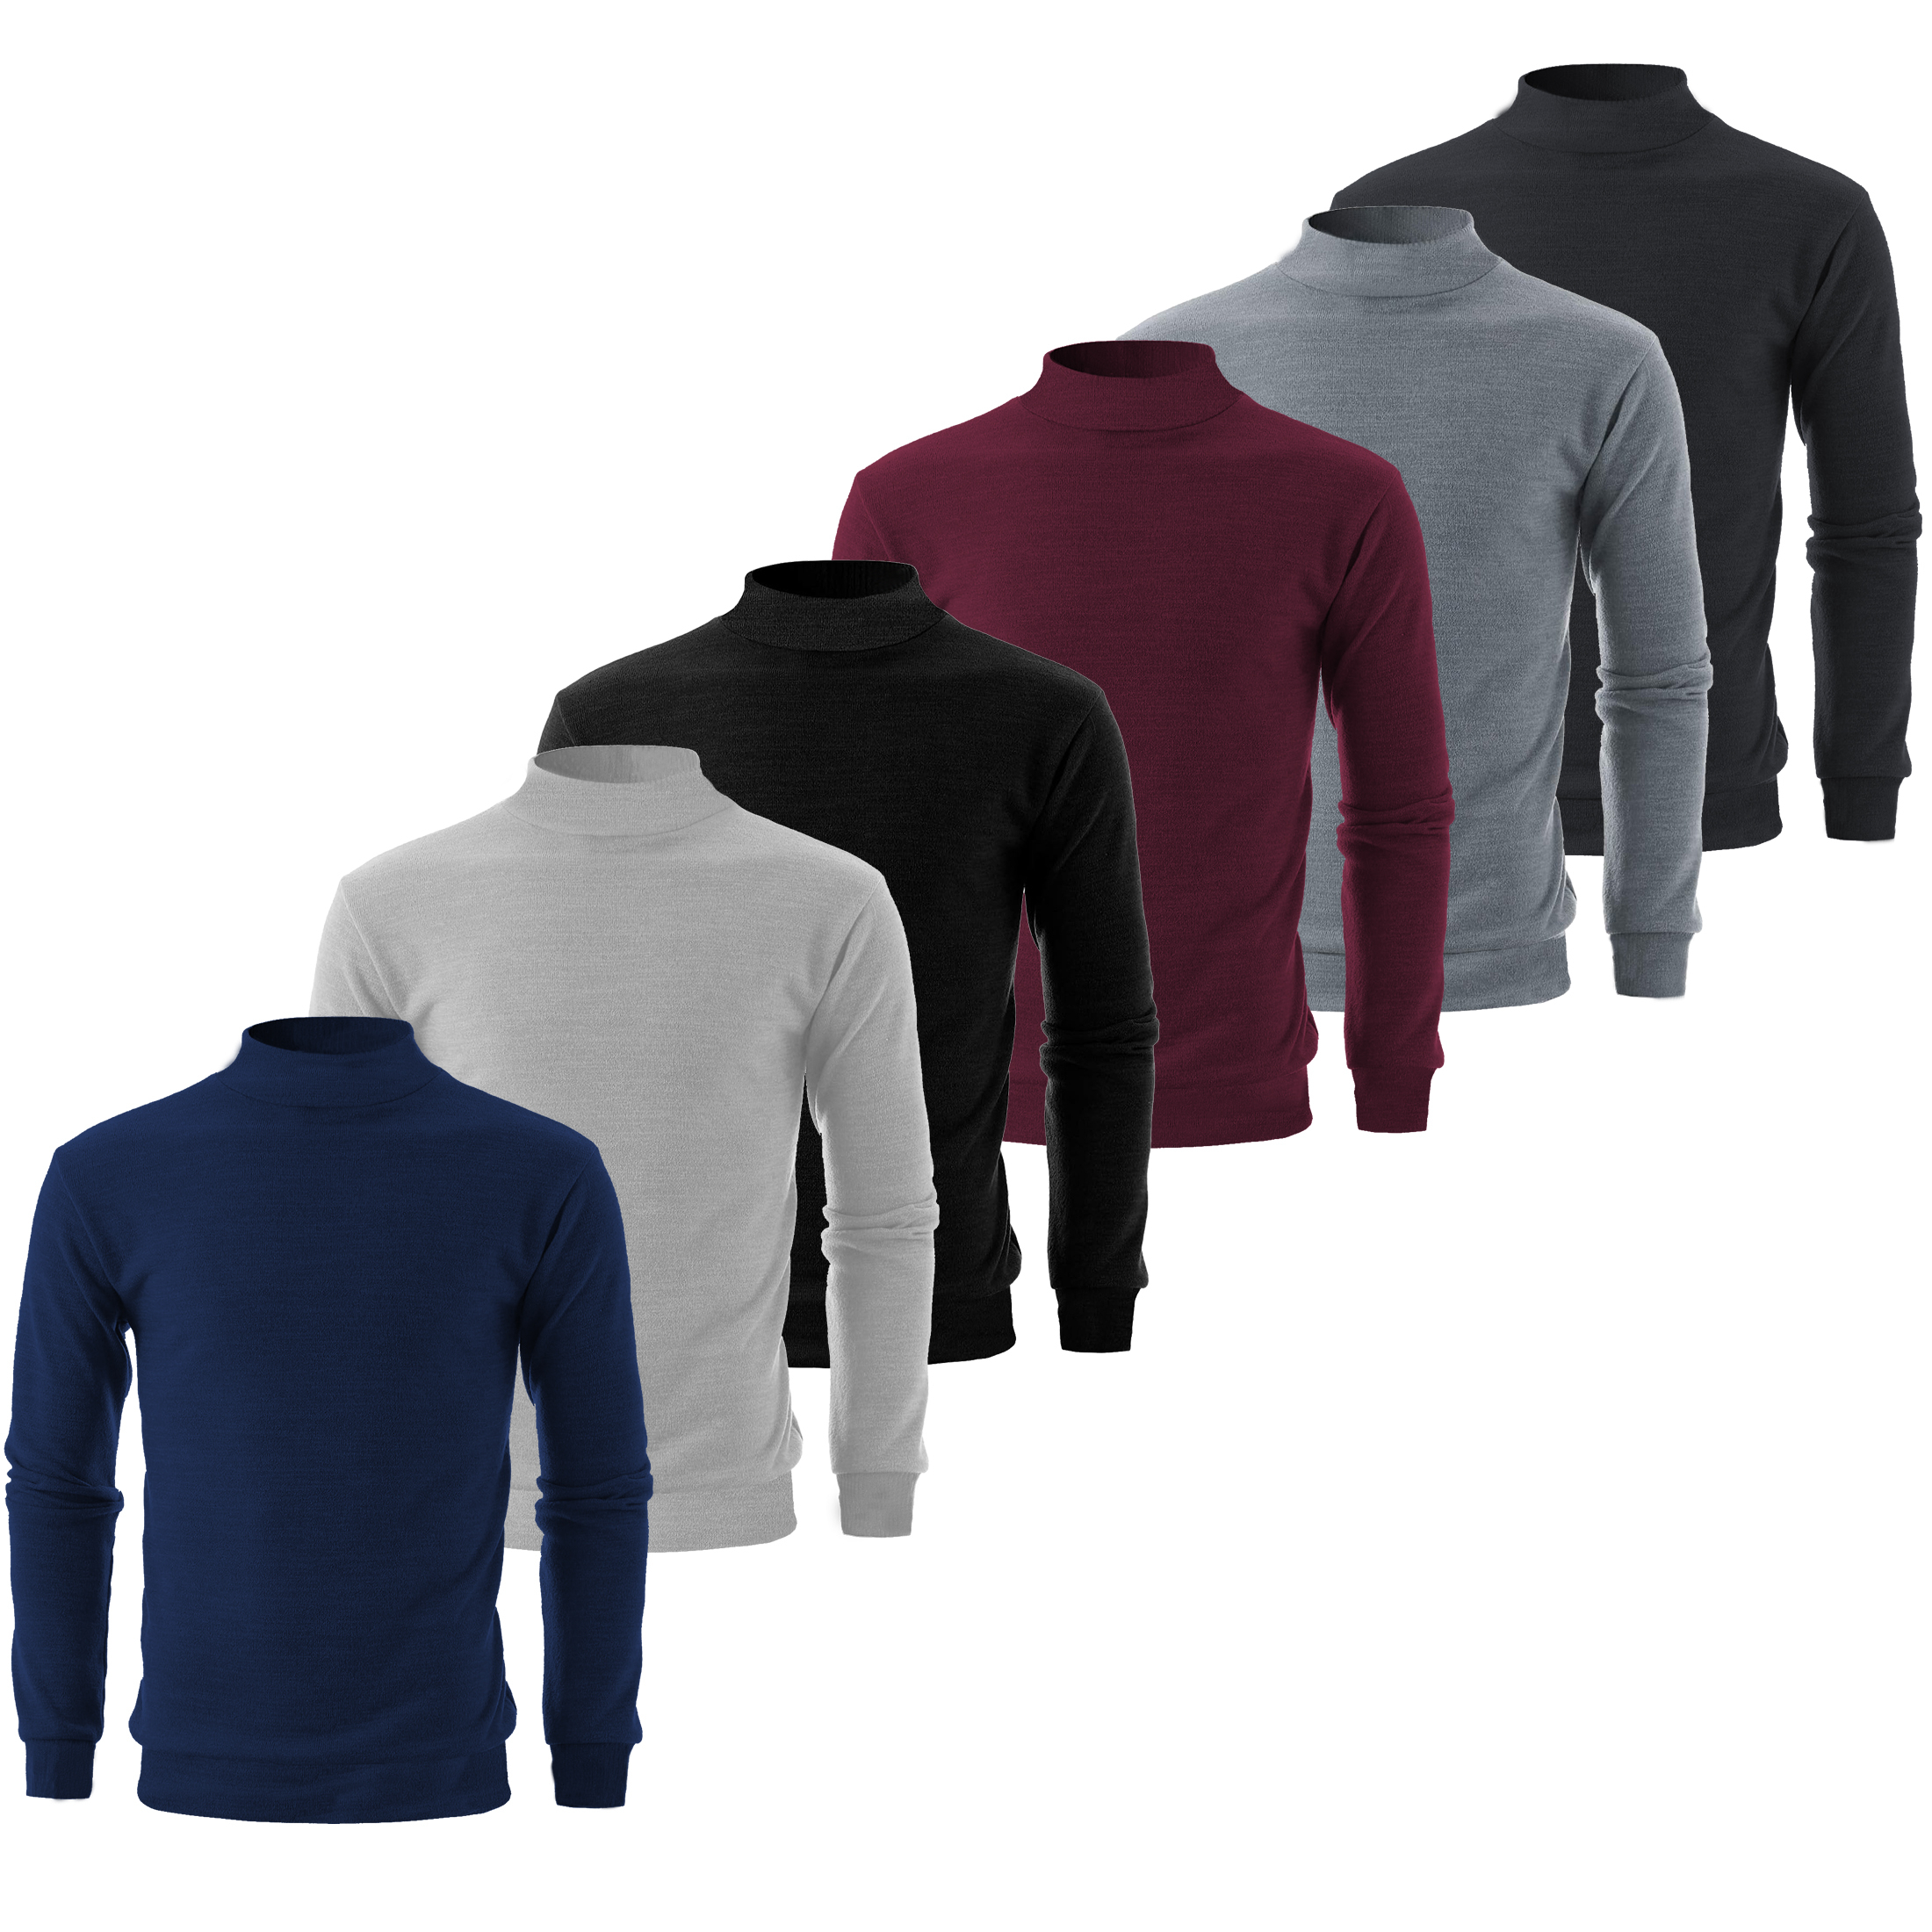 2 Pack:Men's Slim Fit Long Sleeve Casual Mock Neck Pullover Sweater - X-Large